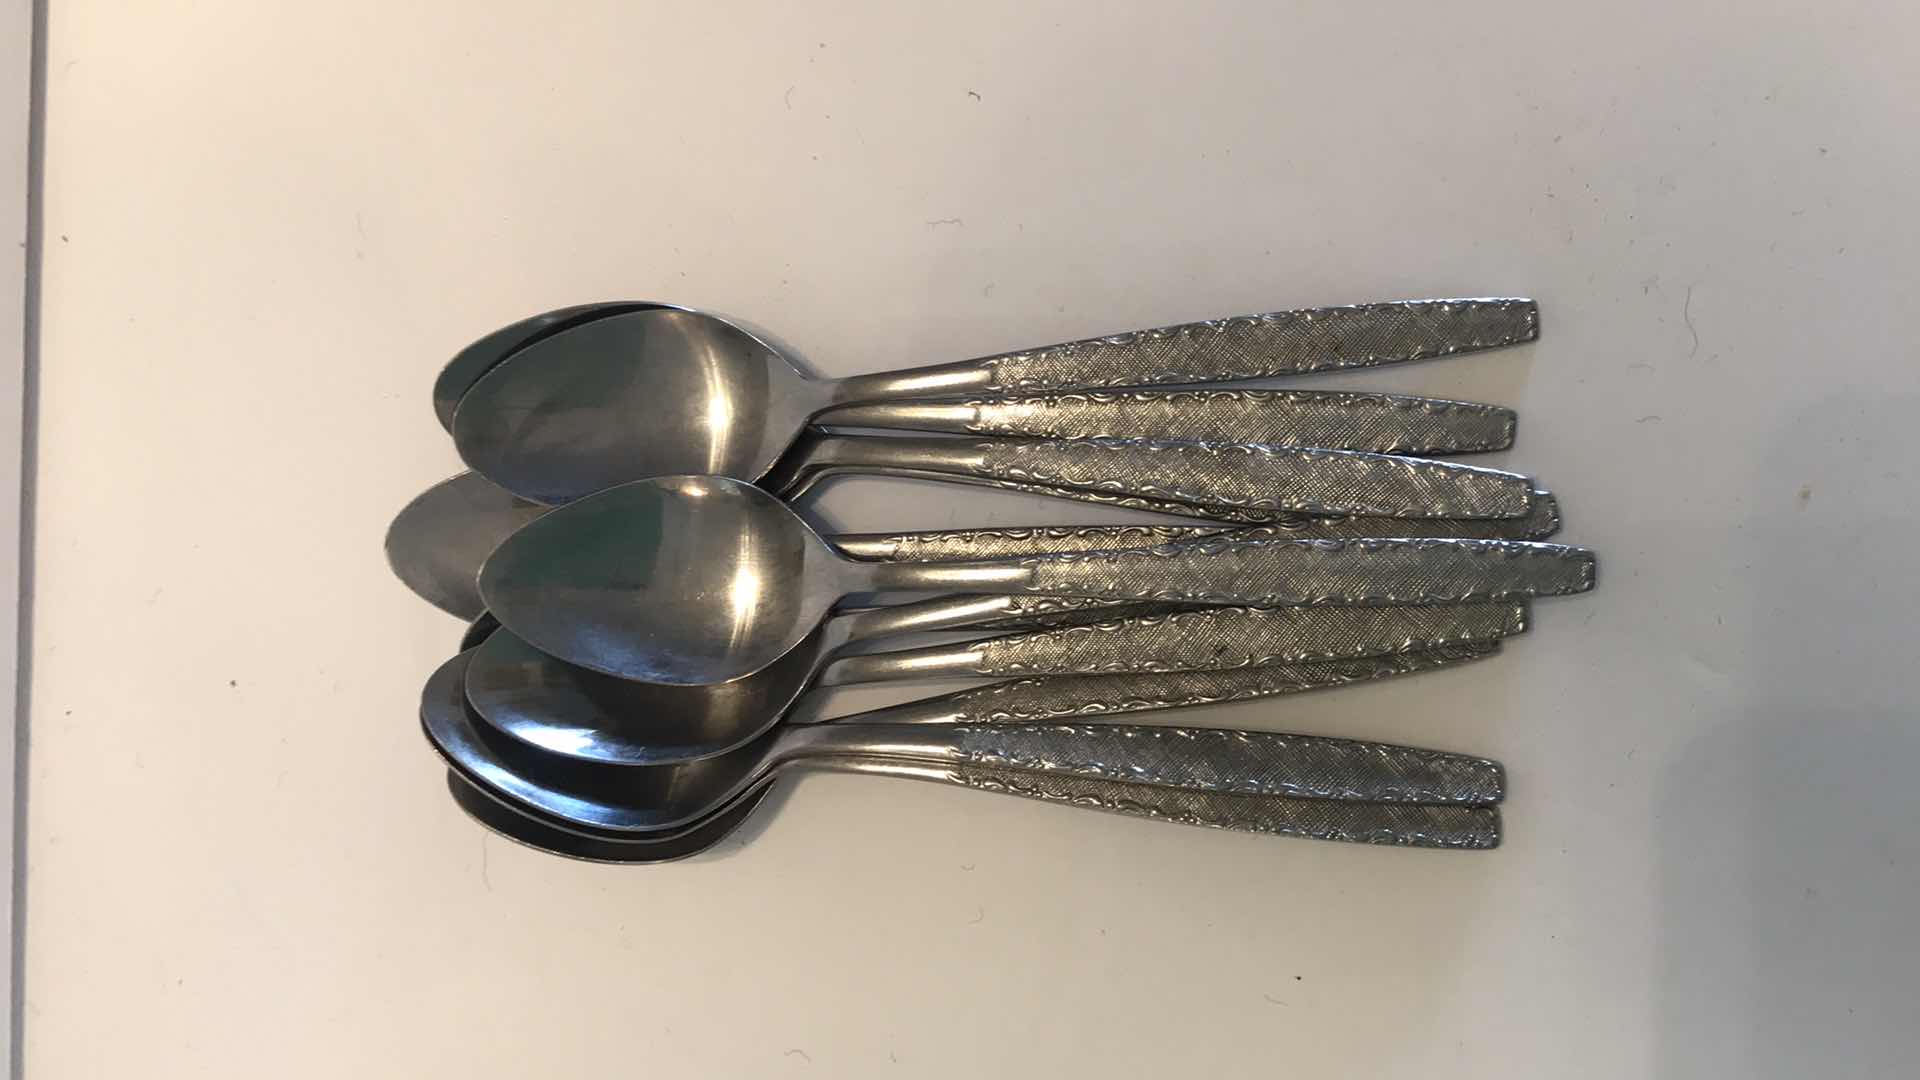 Photo 4 of VINTAGE EDWARD DON & CO SILVERWARE MADE IN KOREA 12 - FORKS 12-TEASPOONS AND 12-SOUP SPOONS